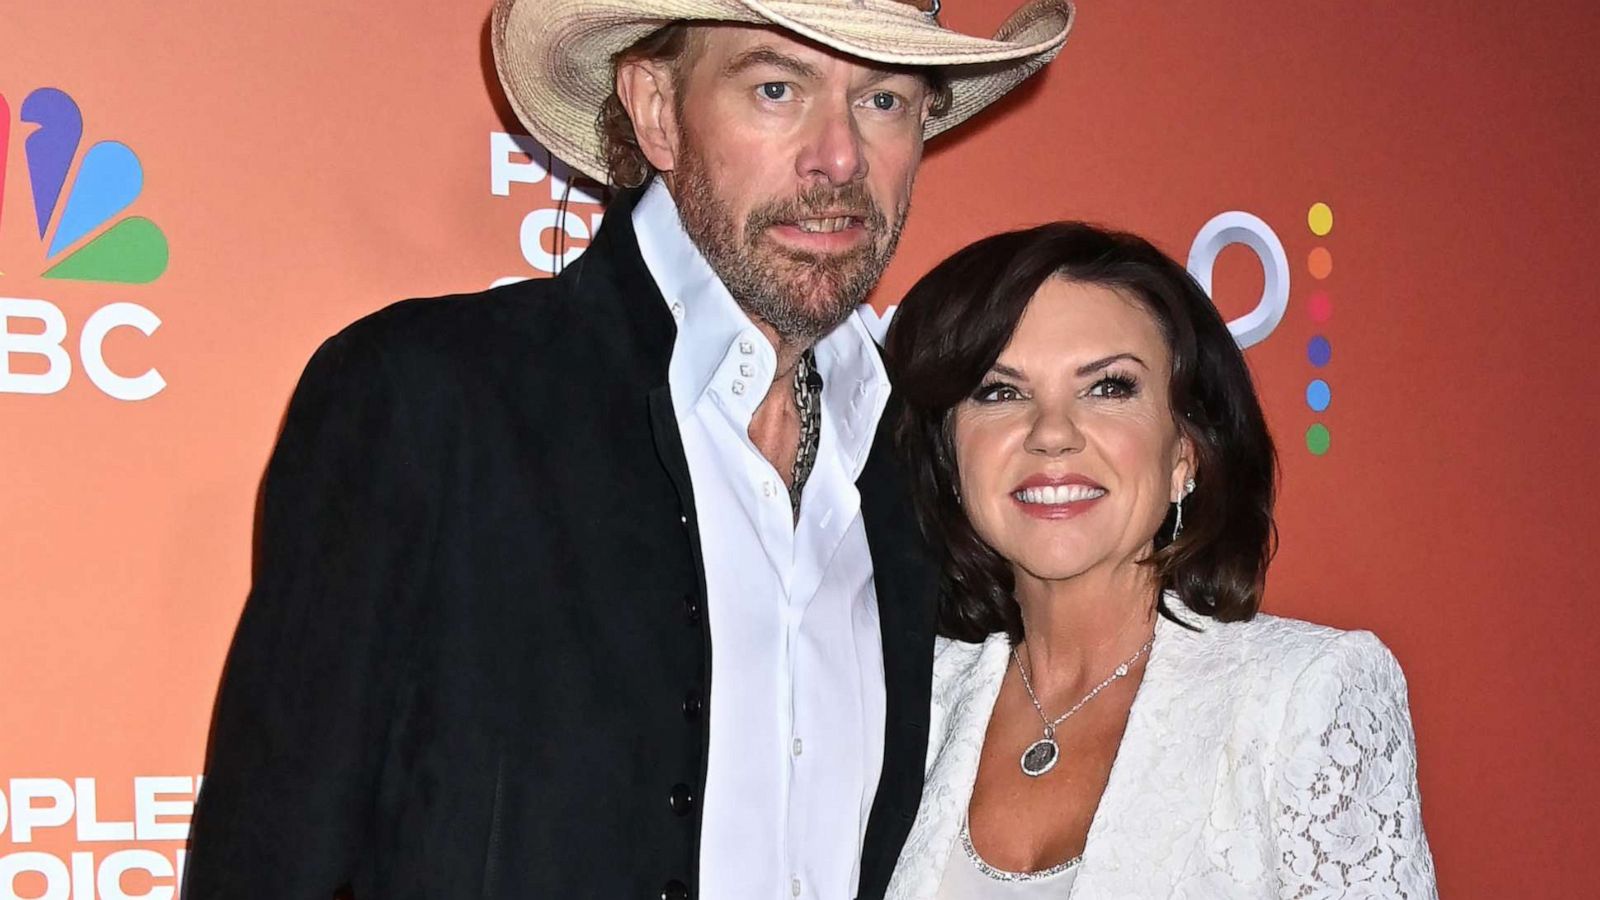 Fans mourn as country singer Toby Keith dies at 62 after battle with stomach cancer